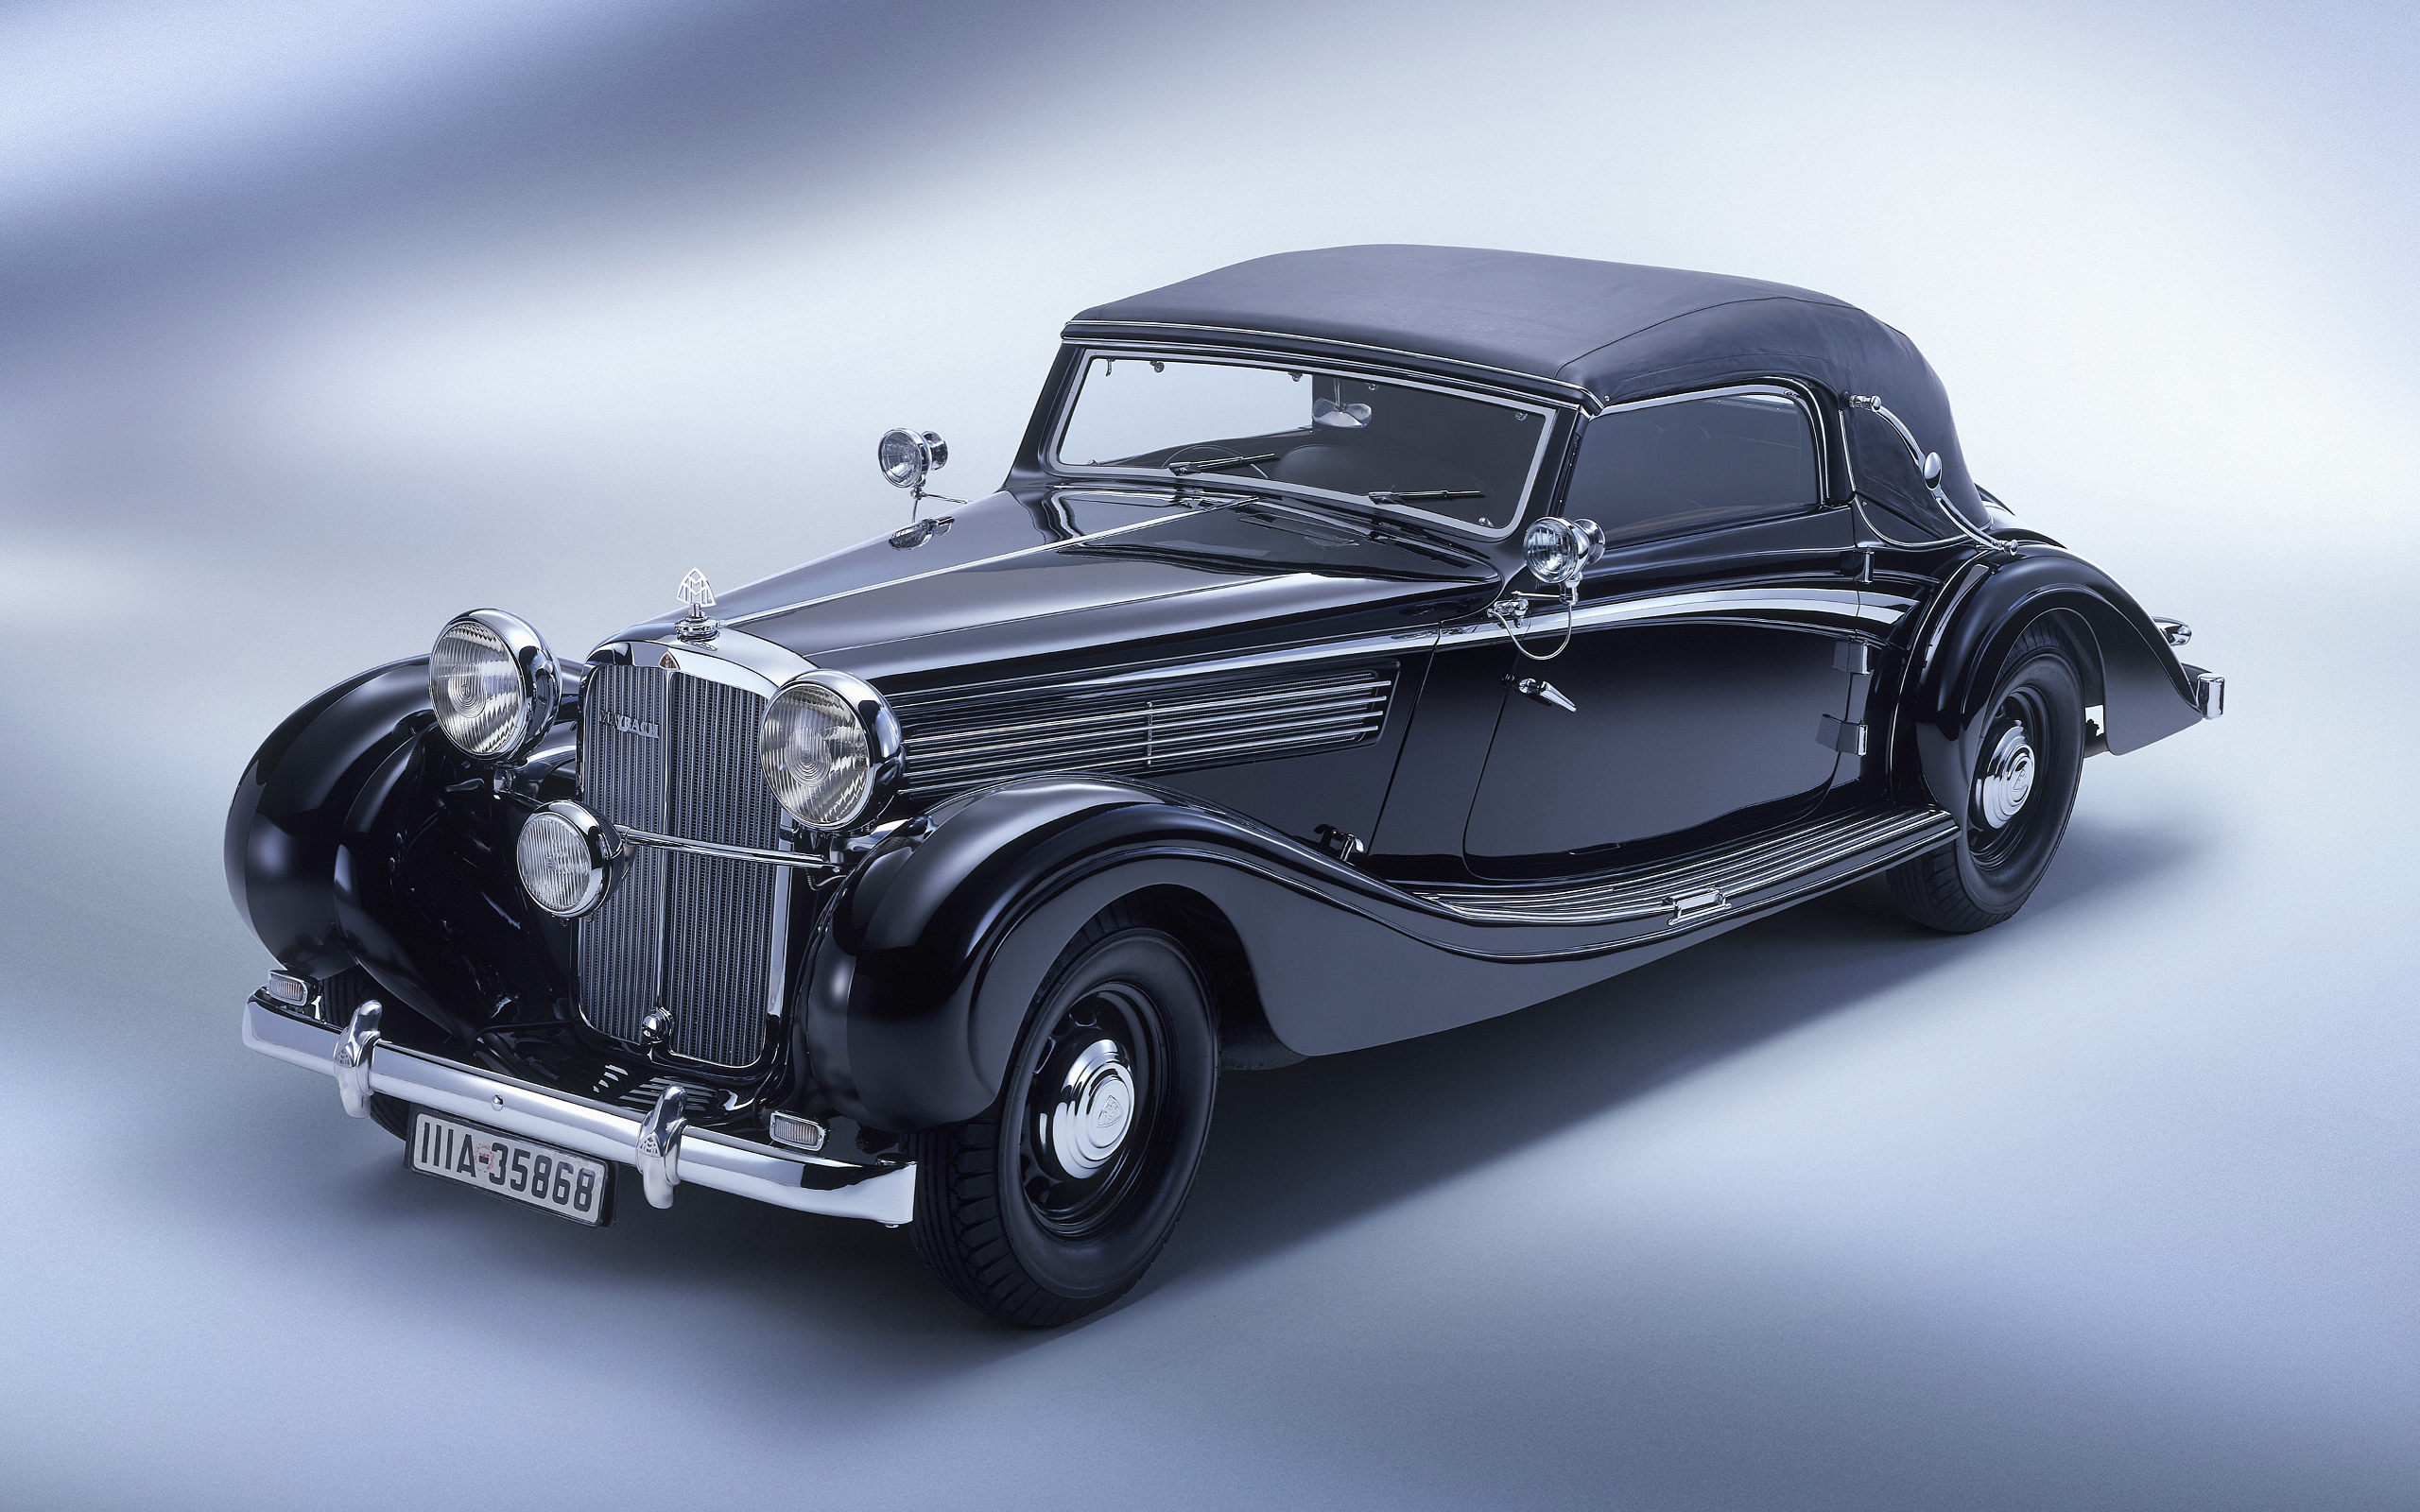 1938 Maybach SW 38 Cabriolet - Luxury vintage vehicle with top down on a desktop wallpaper.